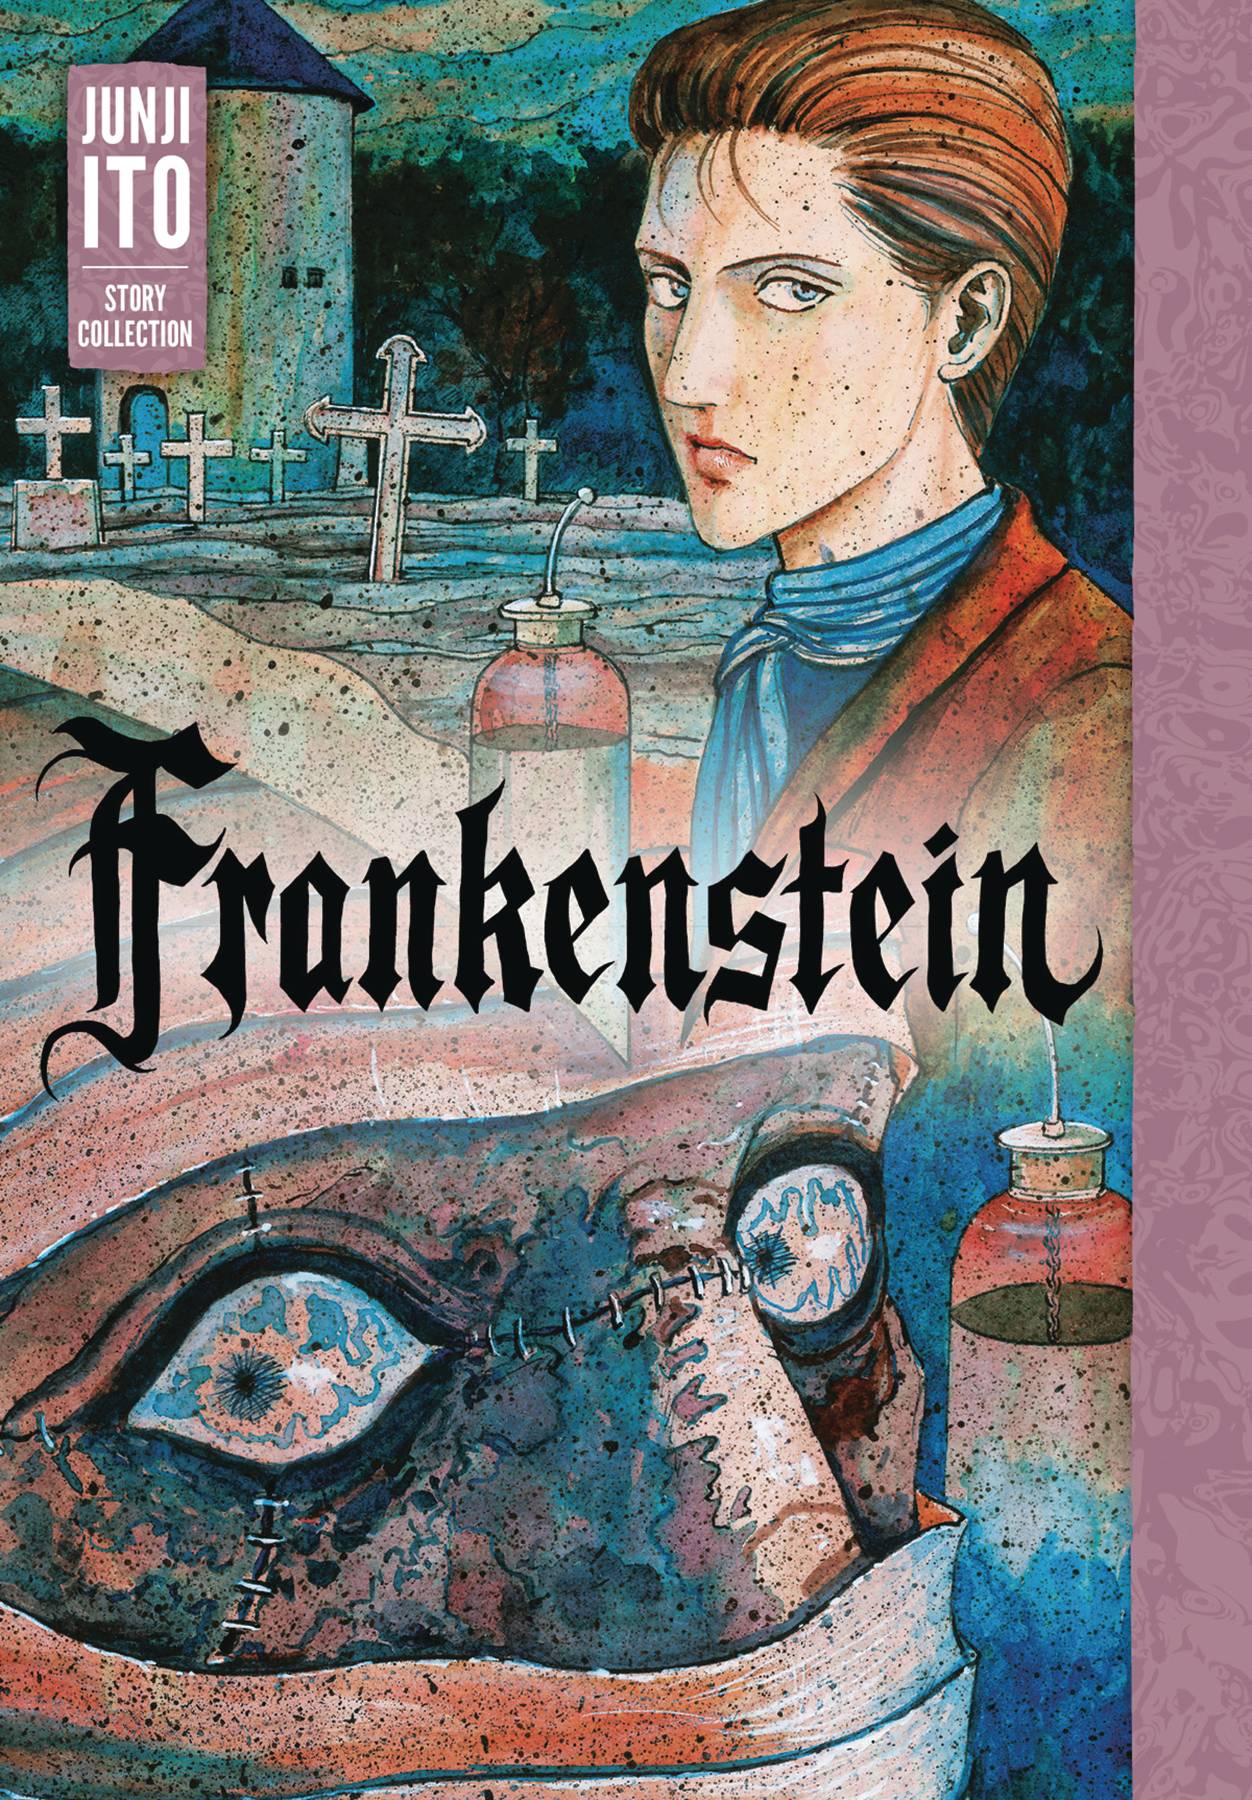 Junji Ito Story Collection Hardcover Volume 3 Frankenstein